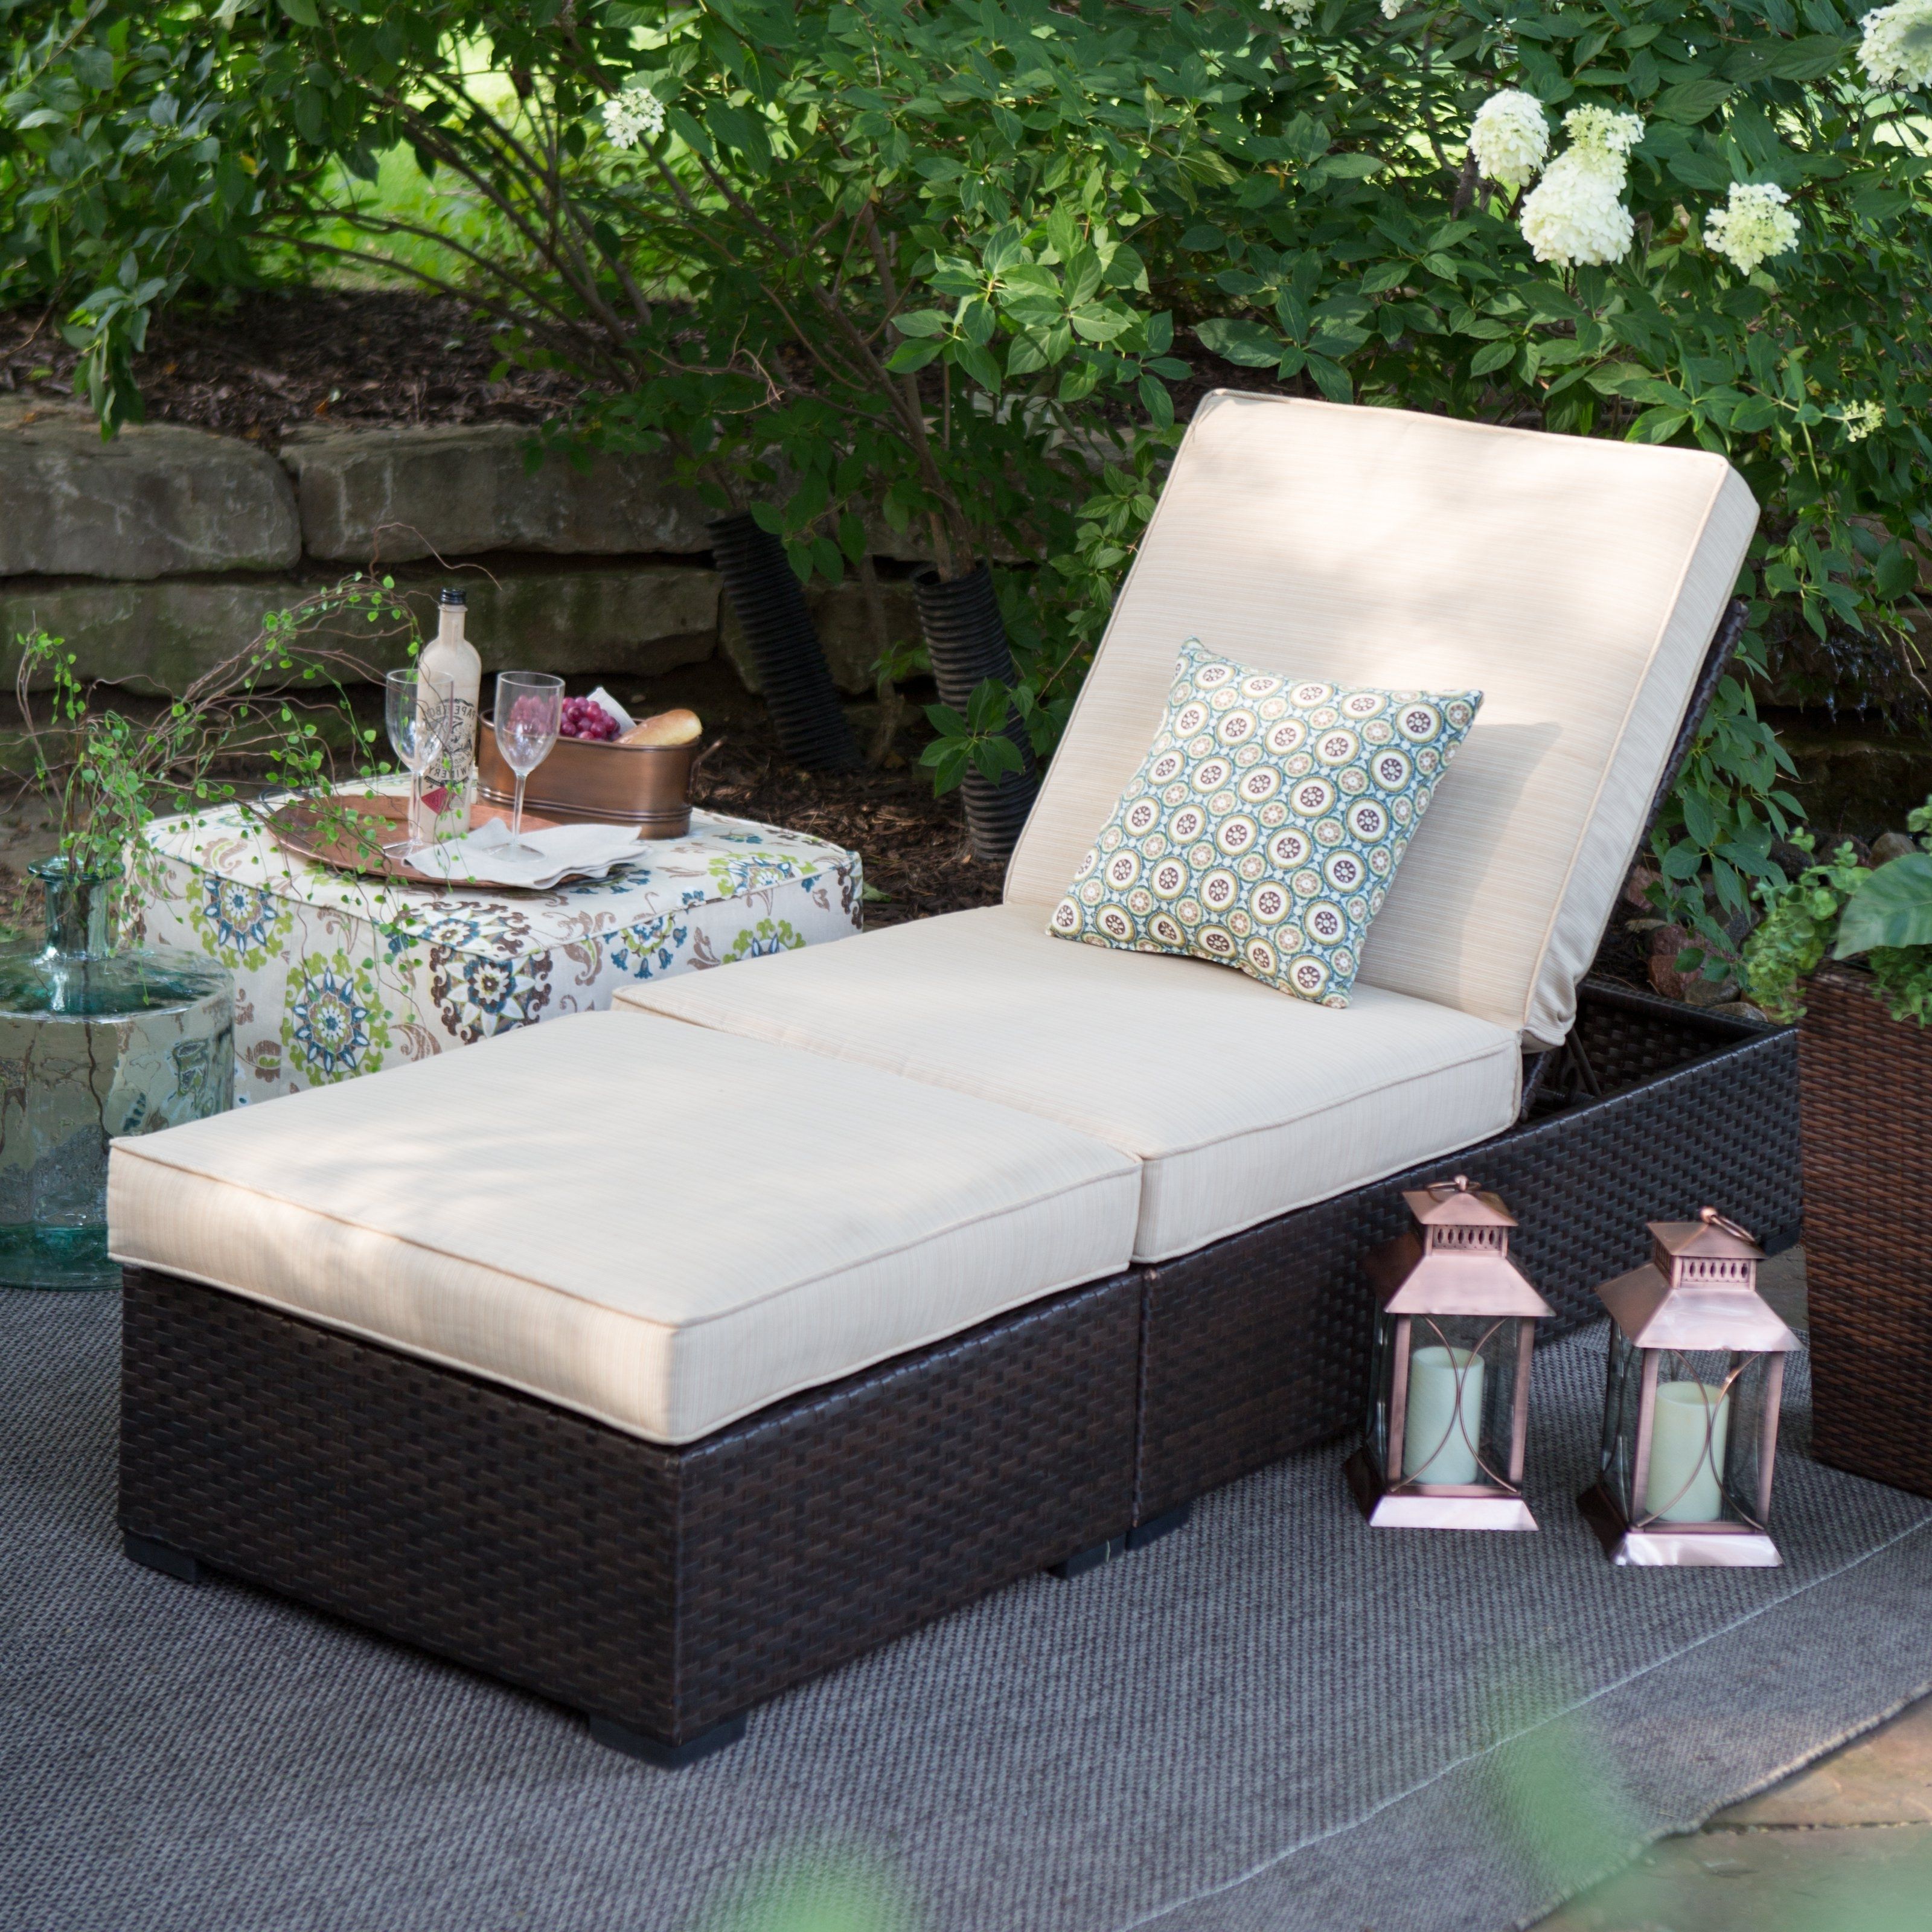 Outdoor Wicker Chaise Lounges In Recent Belham Living Marcella Wide Wicker Chaise Lounge With Ottoman (View 6 of 15)